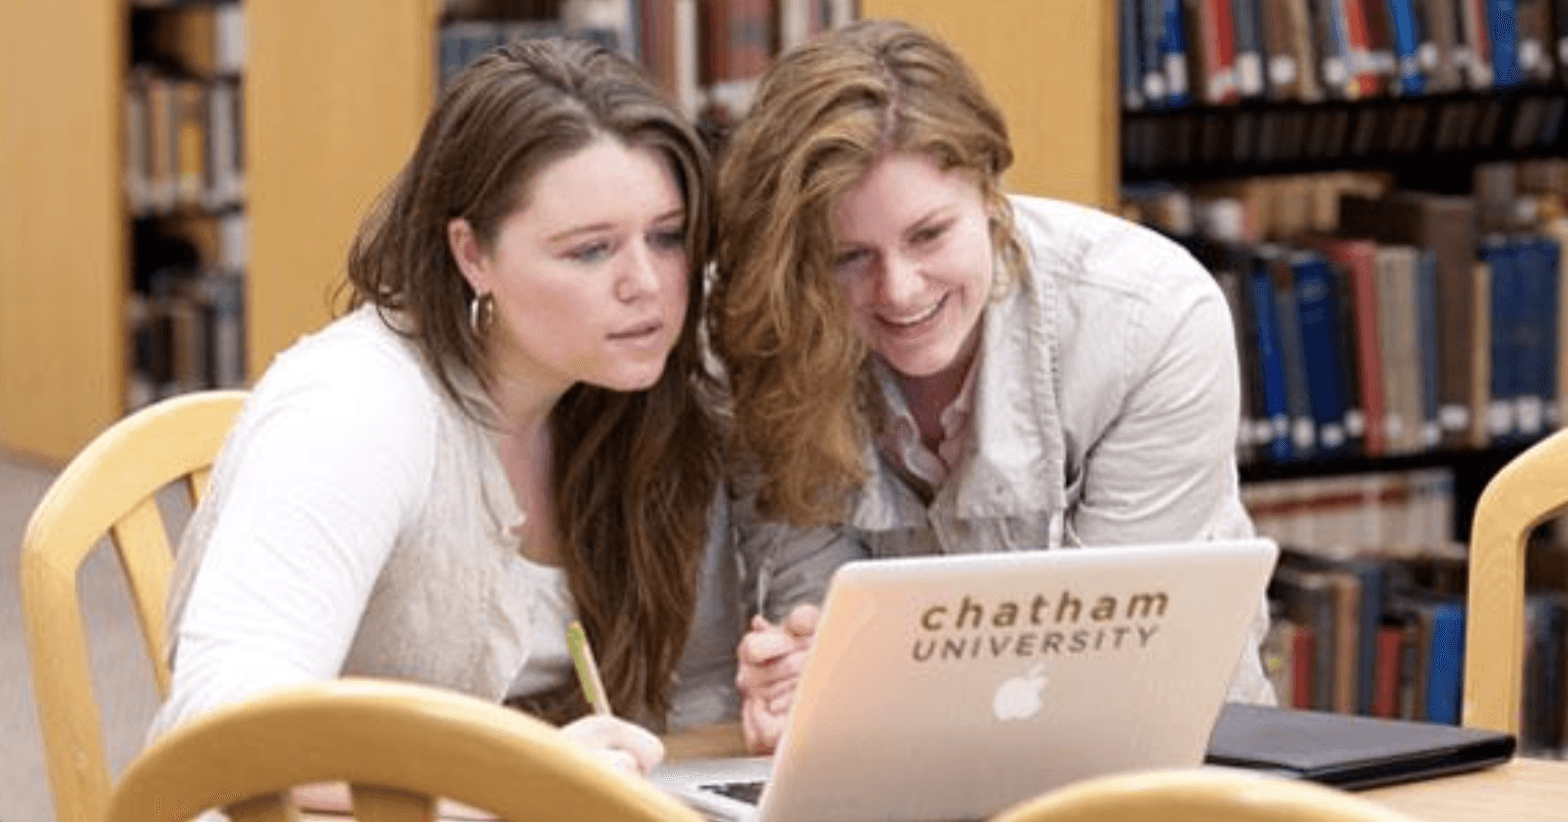 ITS Resources and Services for Chatham Students